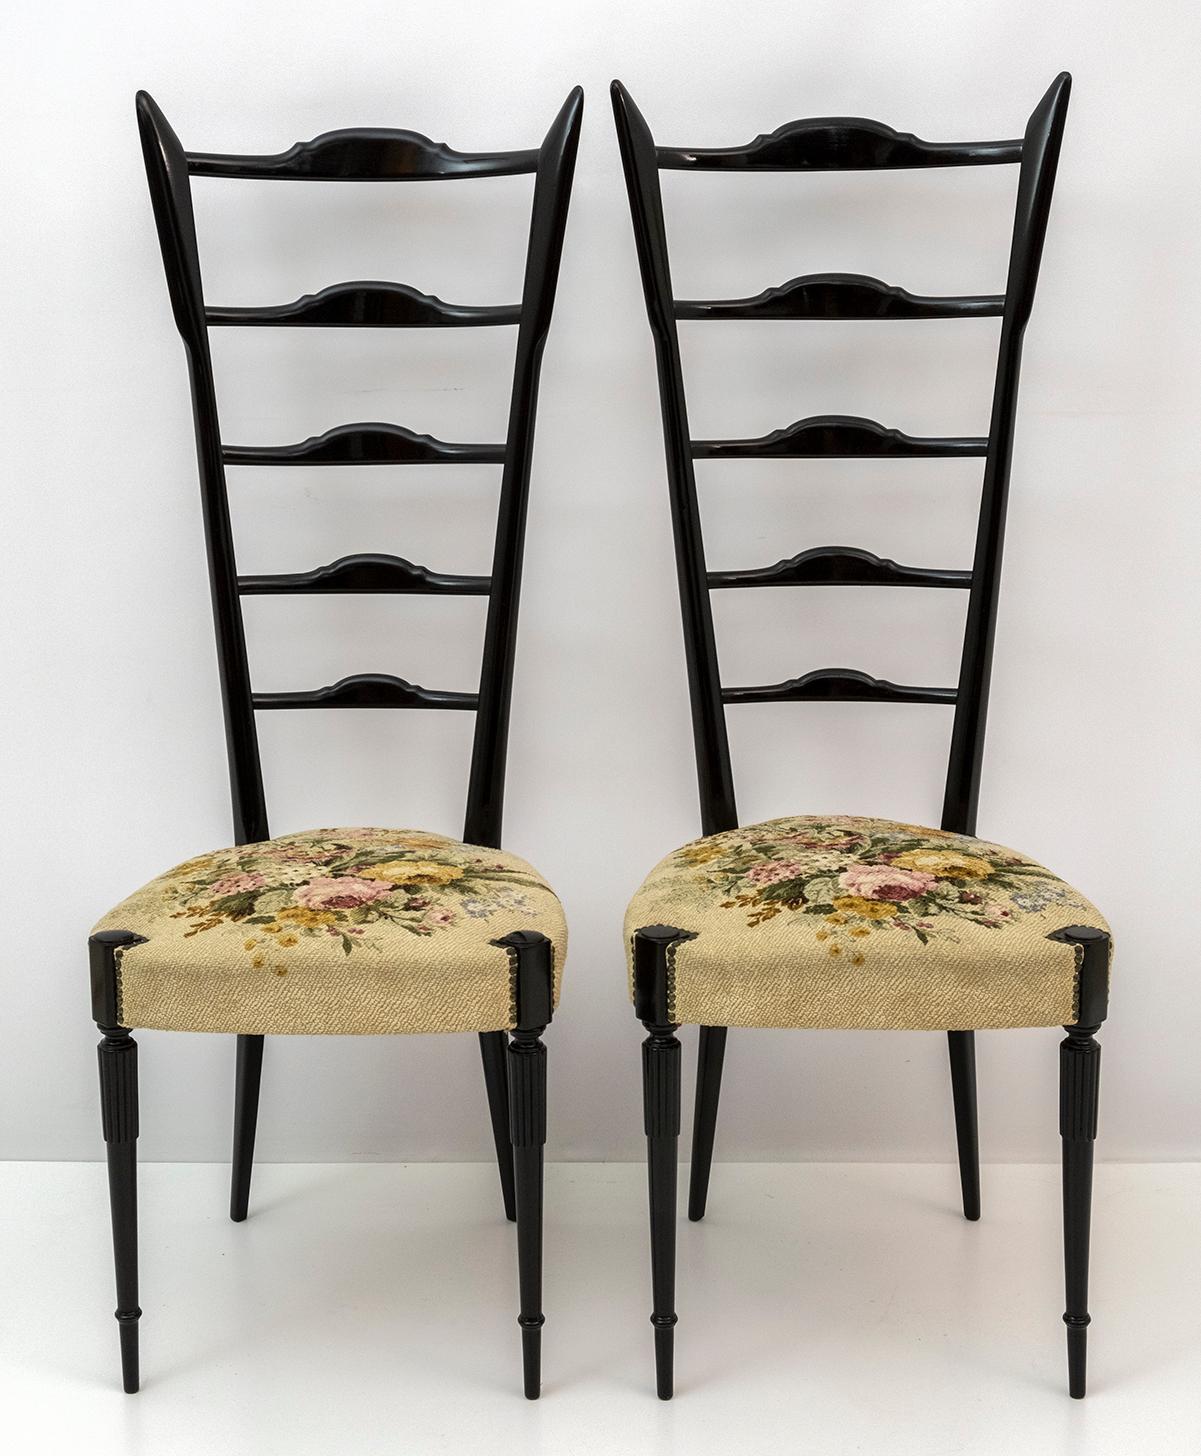 Pair of fantastic high-backed ladder chairs in walnut-stained beech with seats in the original fabric of the time. These amazing pieces were designed by Gio Ponti for Chiavari in the 1950's in Italy.